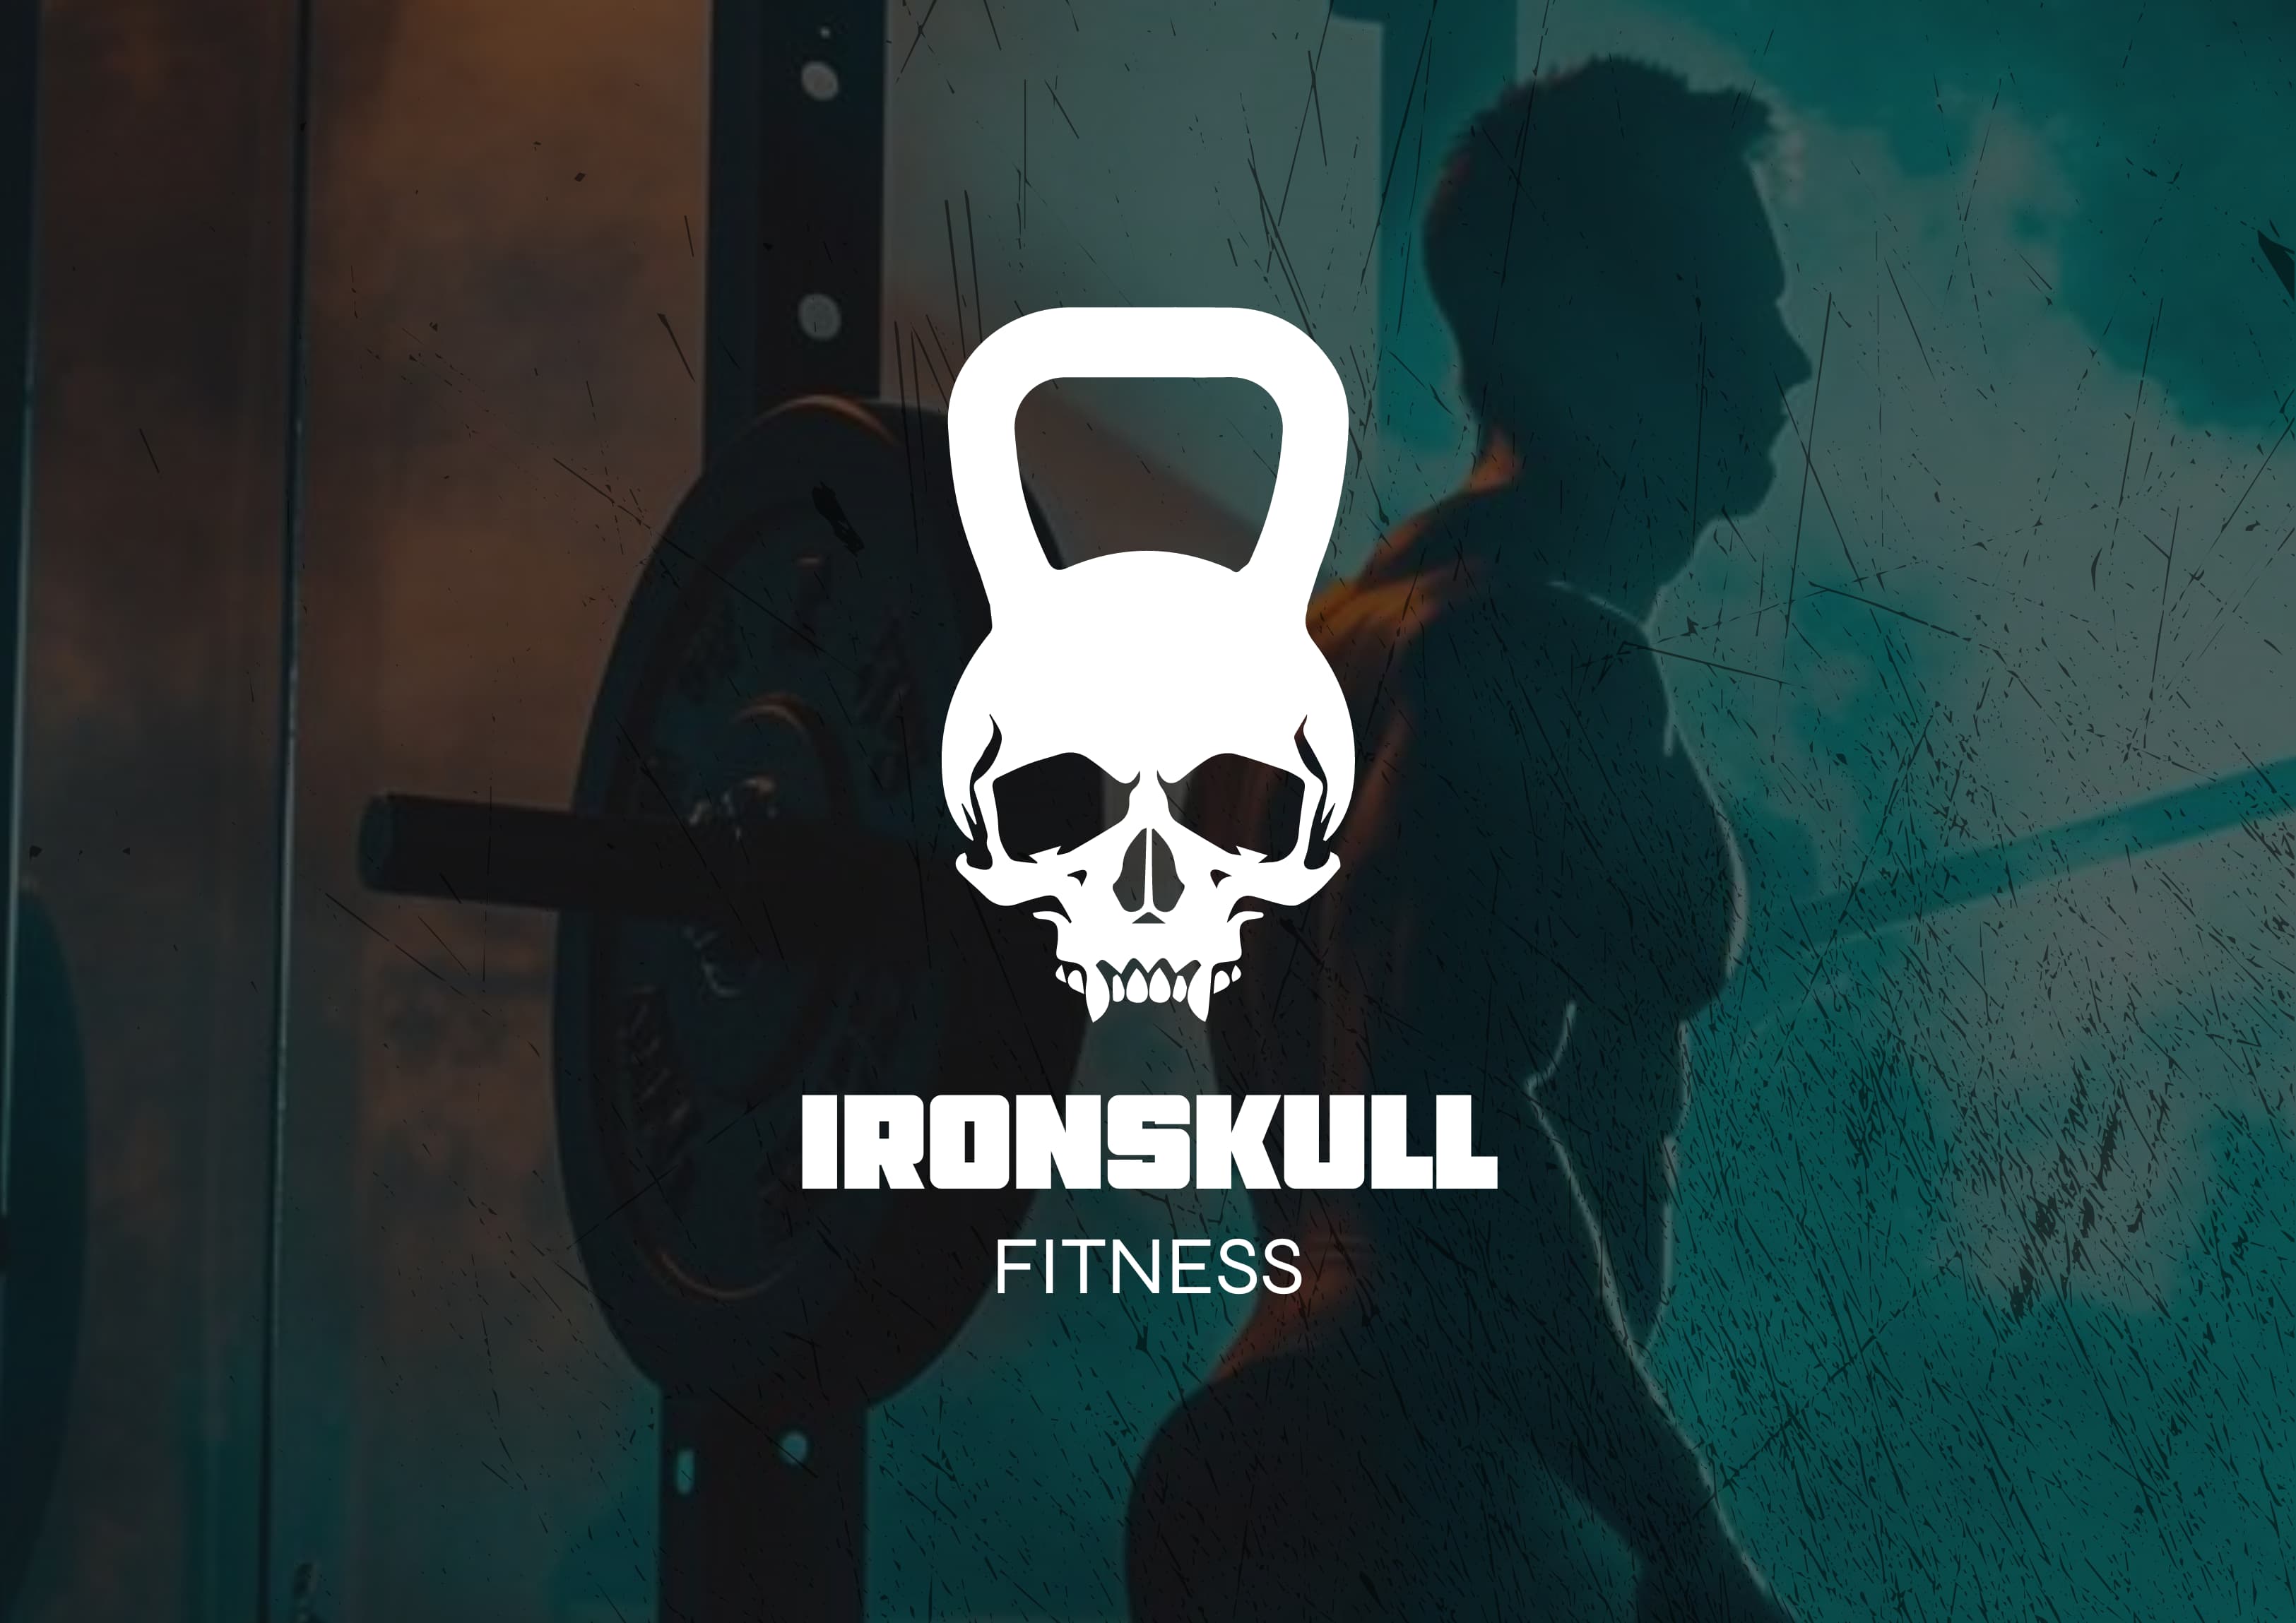 Ironskull fitness logo design with gym background.